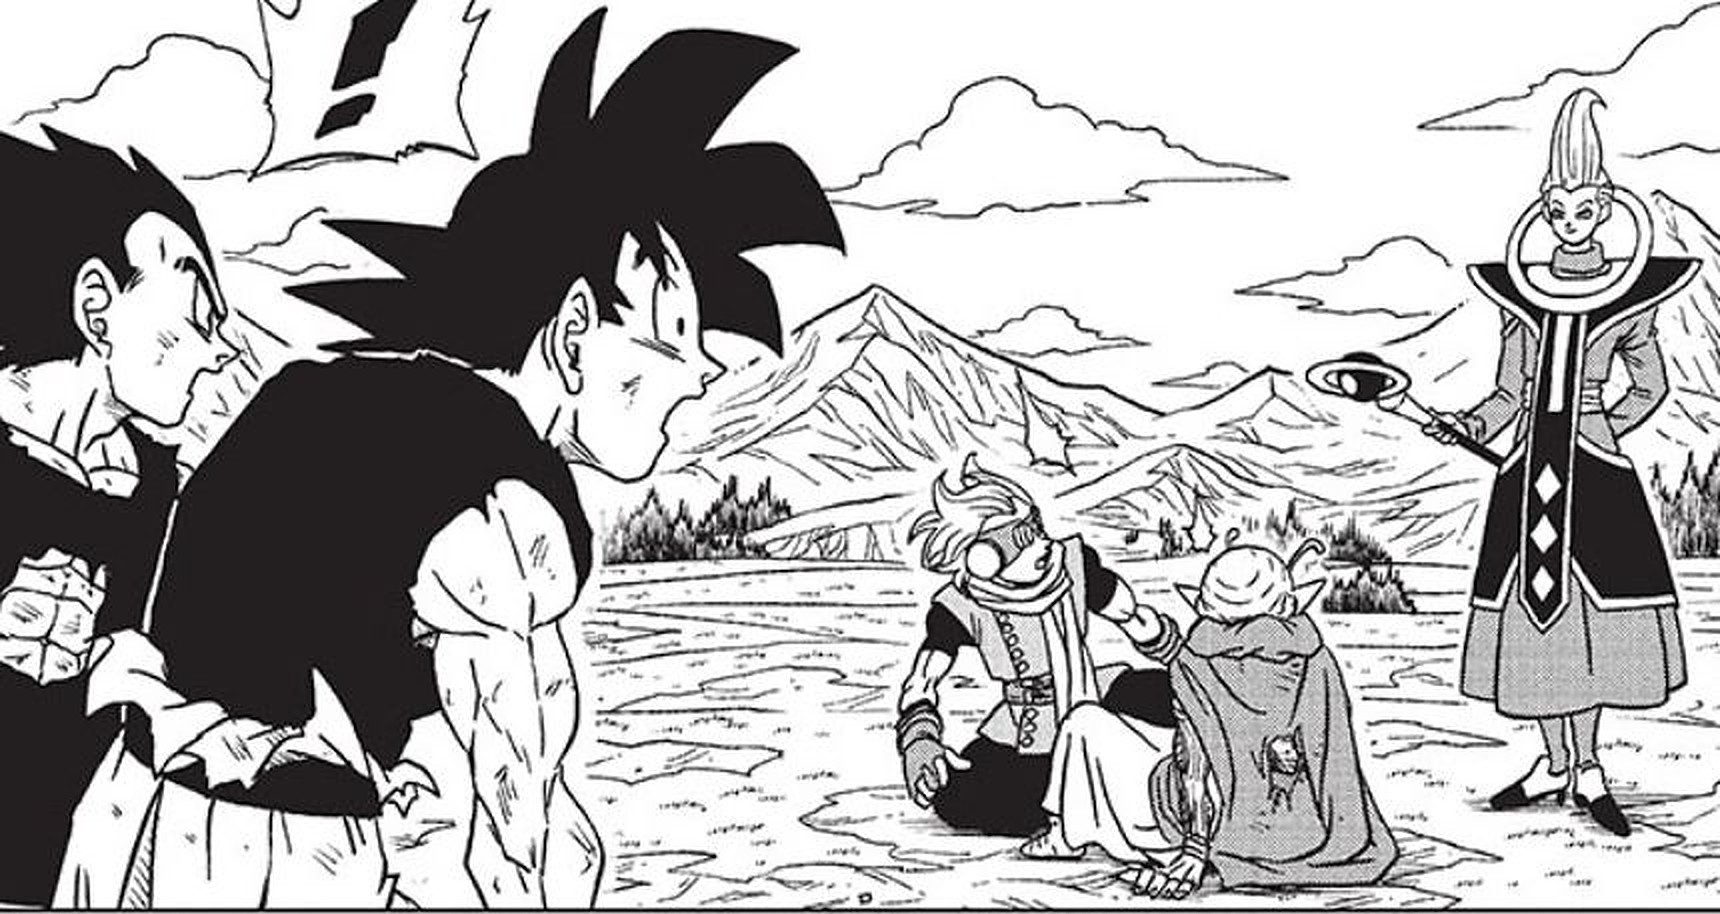 DBHype on X: Dragon Ball Super Chapter 88 is officially out! Read